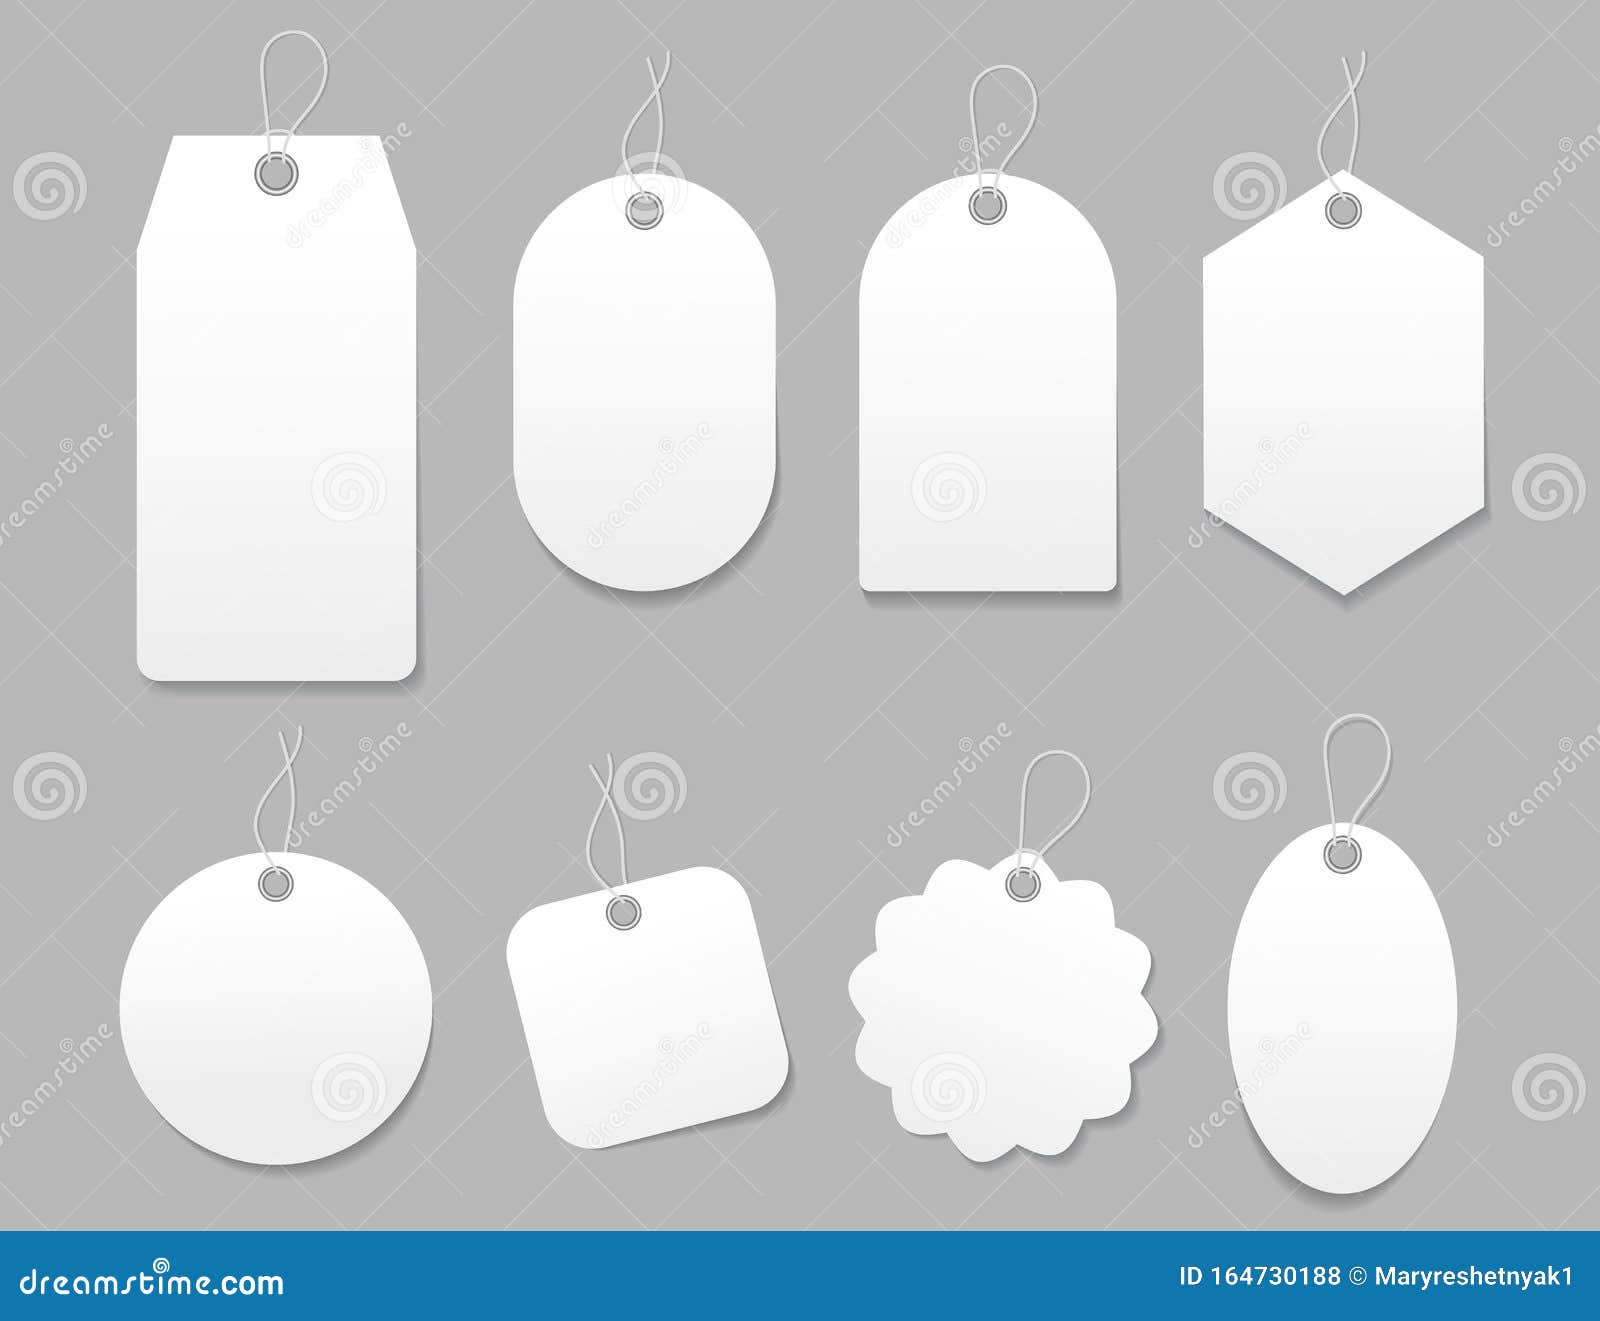 Buy Luggage tags Online - The Messy Corner